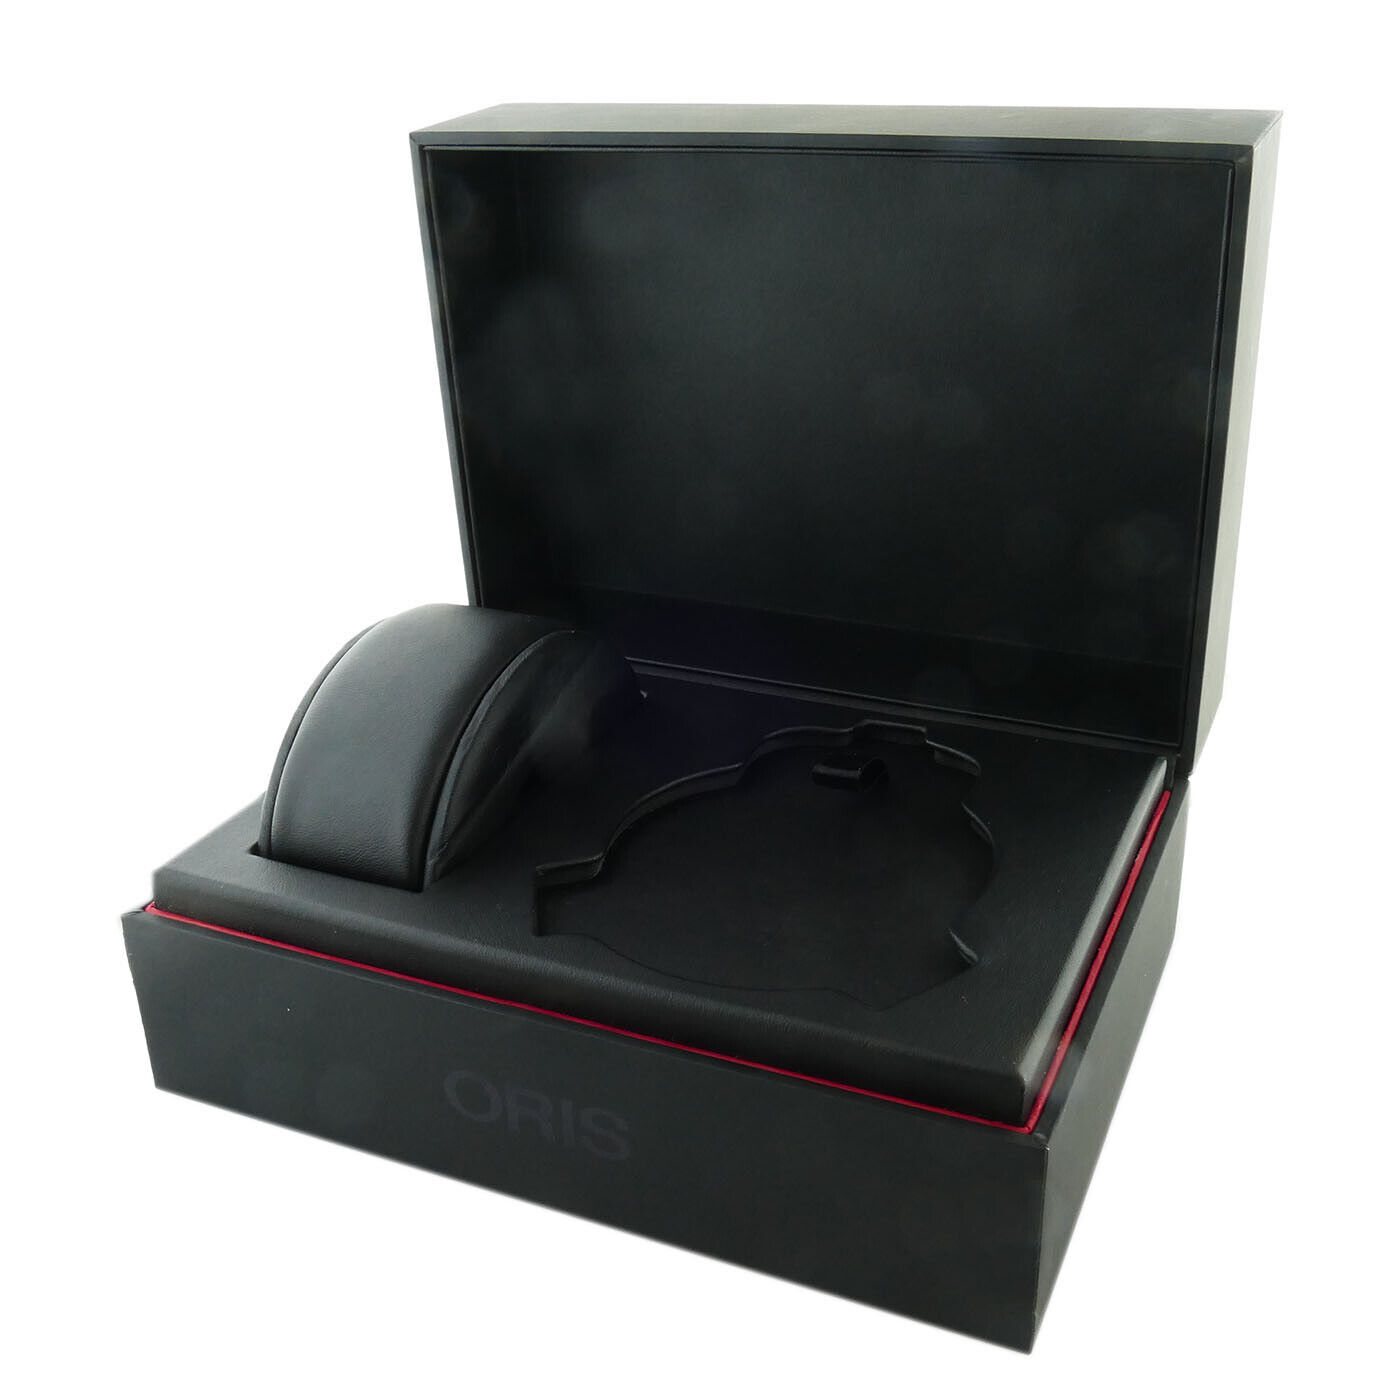 ORIS SWISS MADE SPECIAL EDITION DUO DISPLAY WATCH BOX